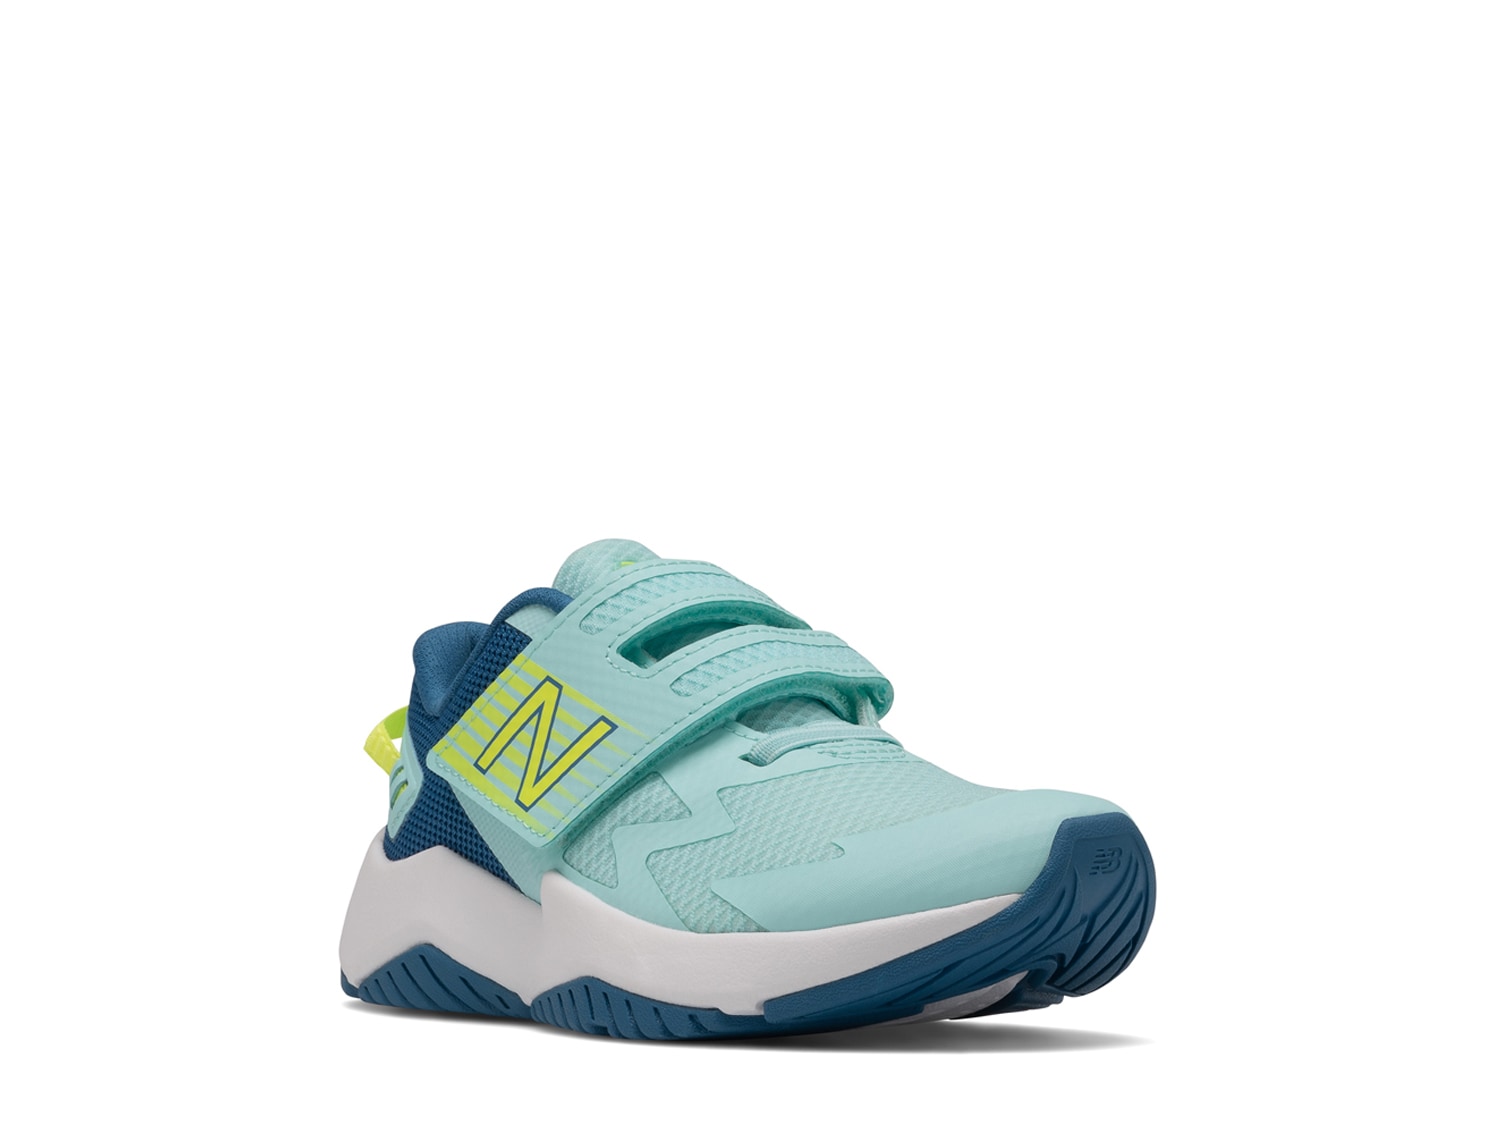 new balance extra wide toddler shoes